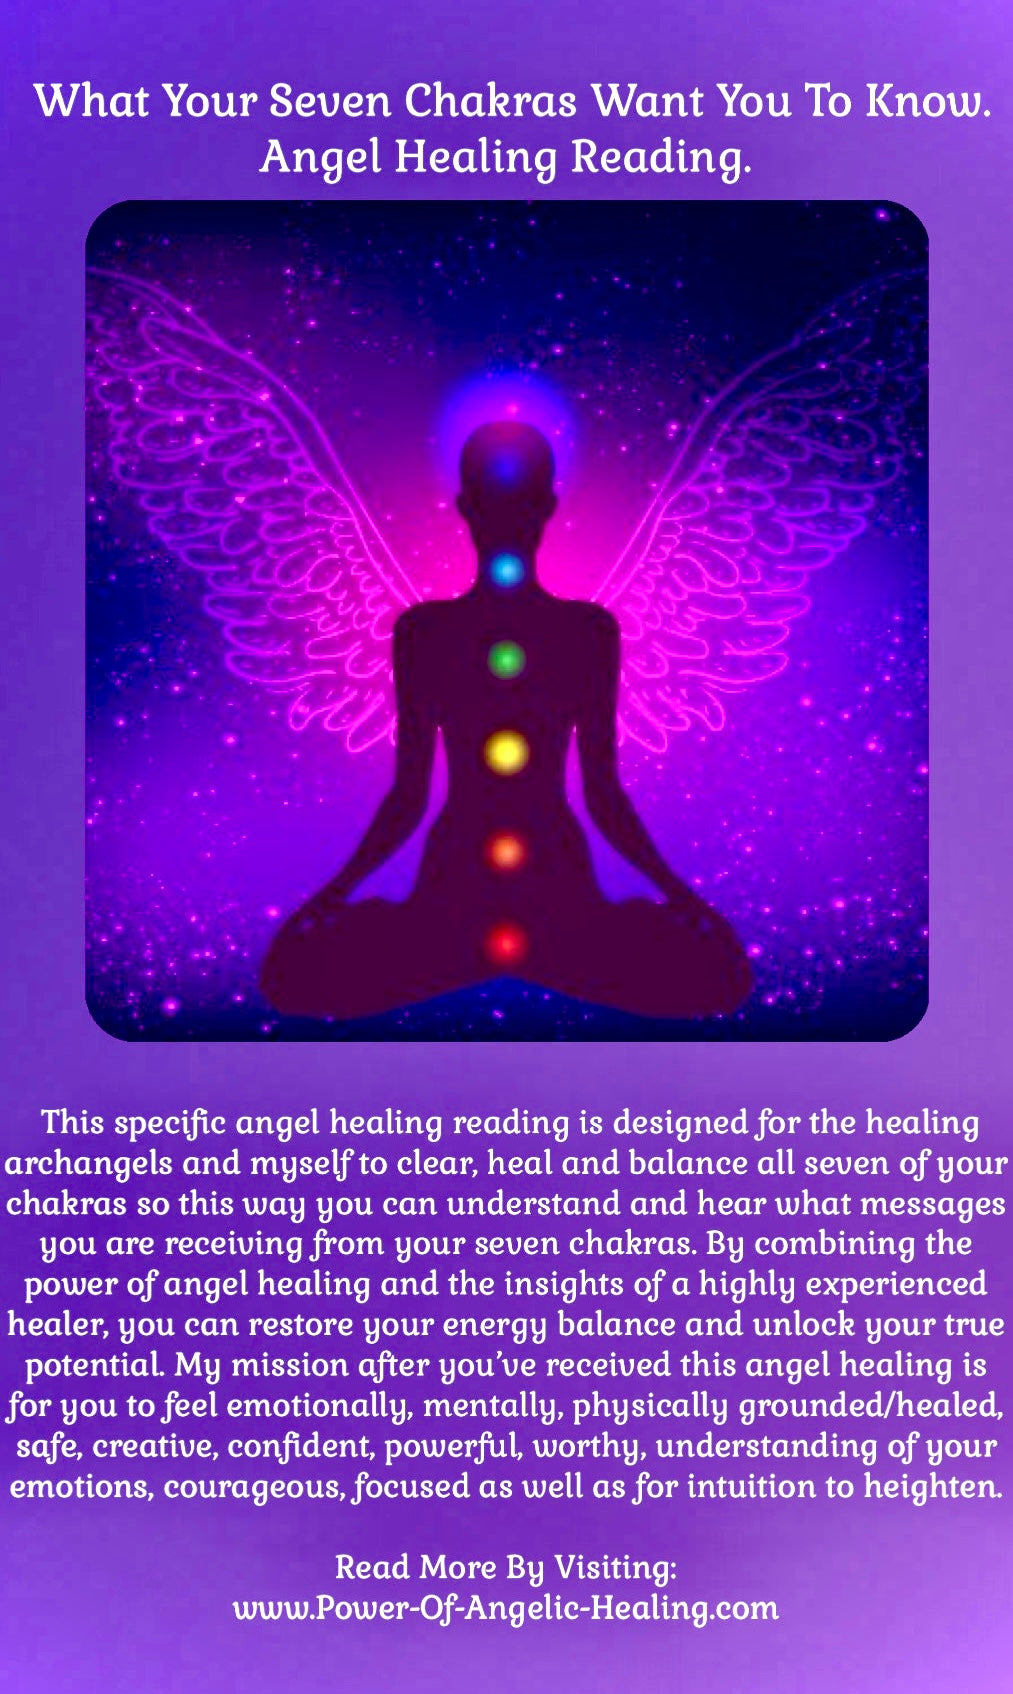 What Your Seven Chakras Want You To Know. Angel Healing Reading.